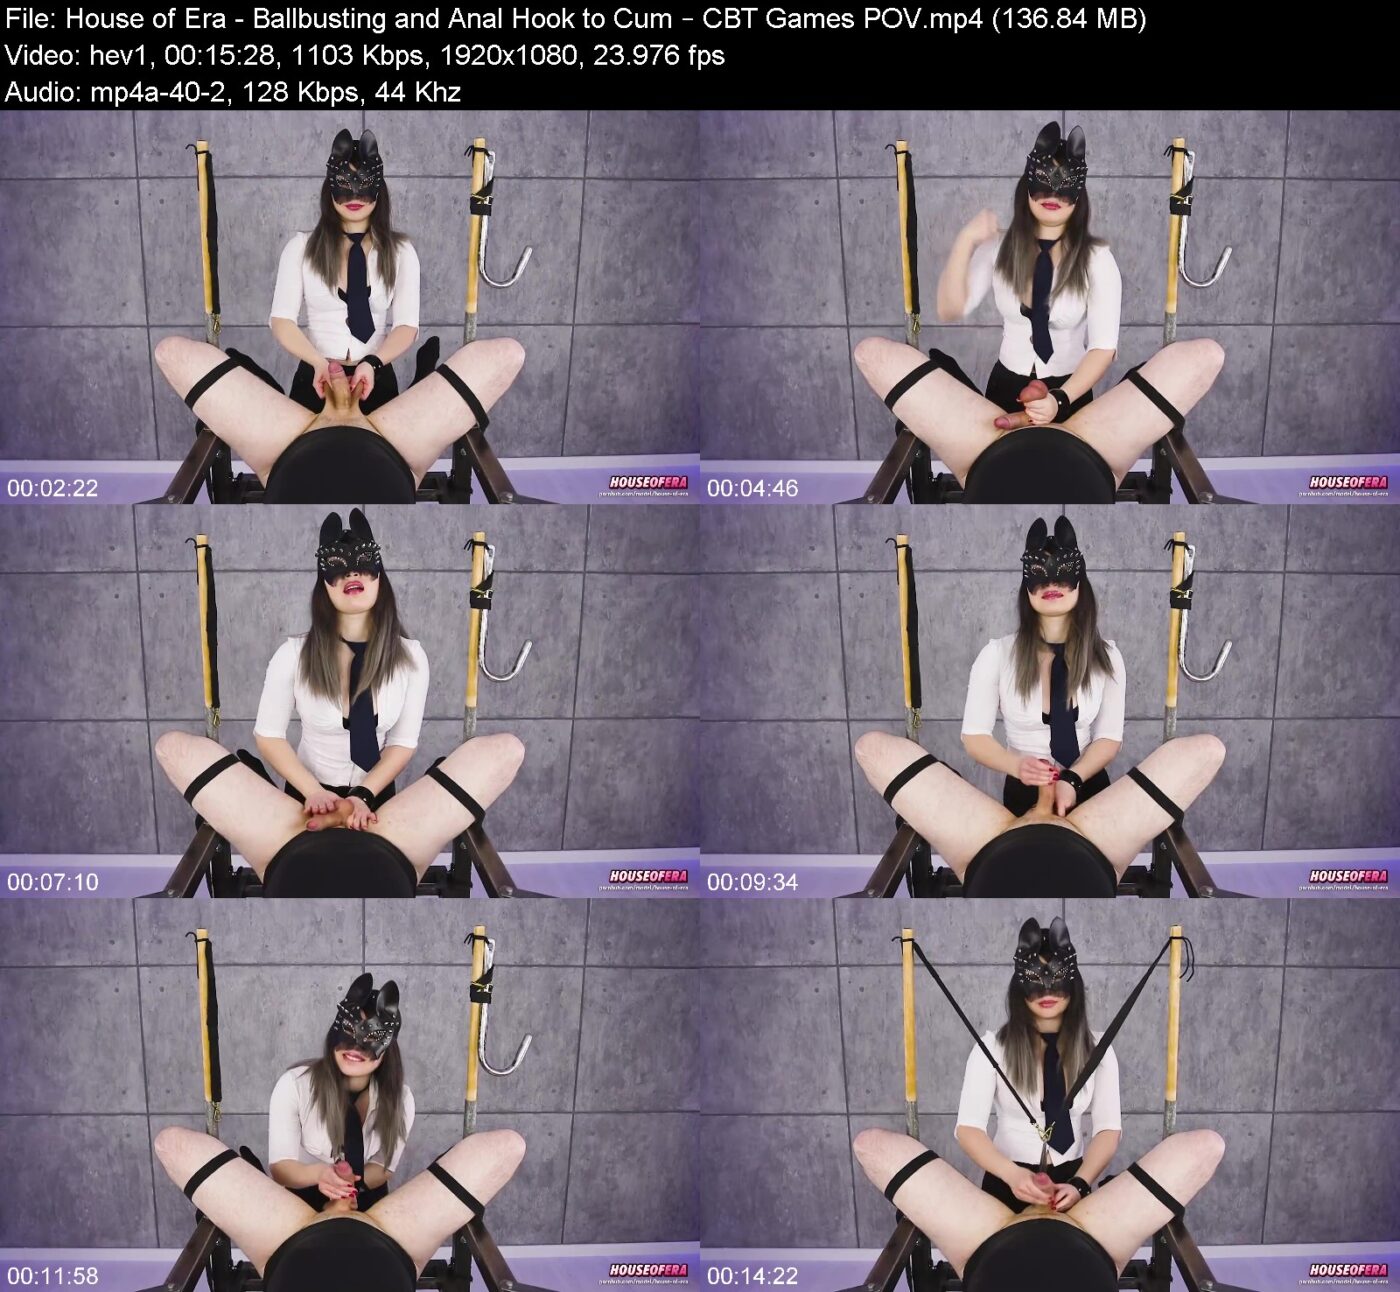 House of Era in Ballbusting & Anal Hook to Cum in CBT Games POV